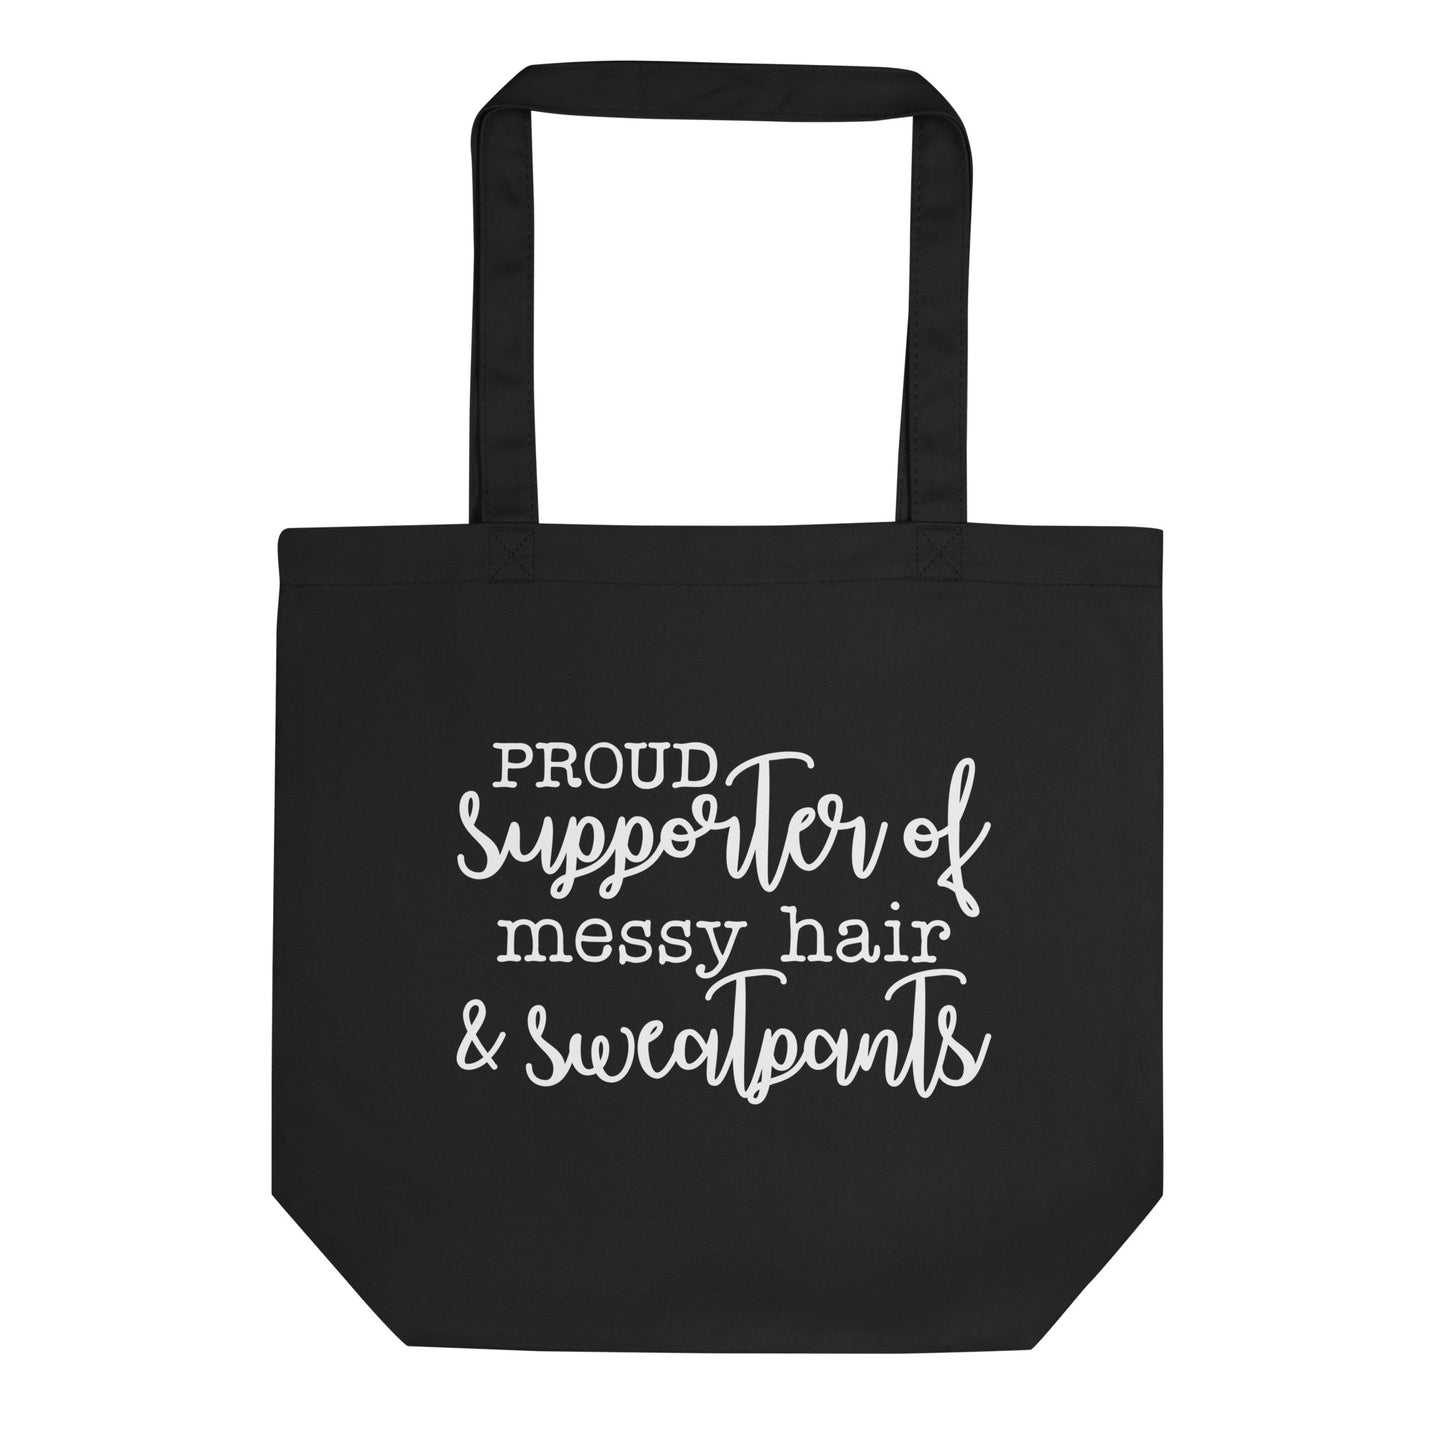 Proud Supporter of Messy Hair & Sweatpants Eco Tote Bag